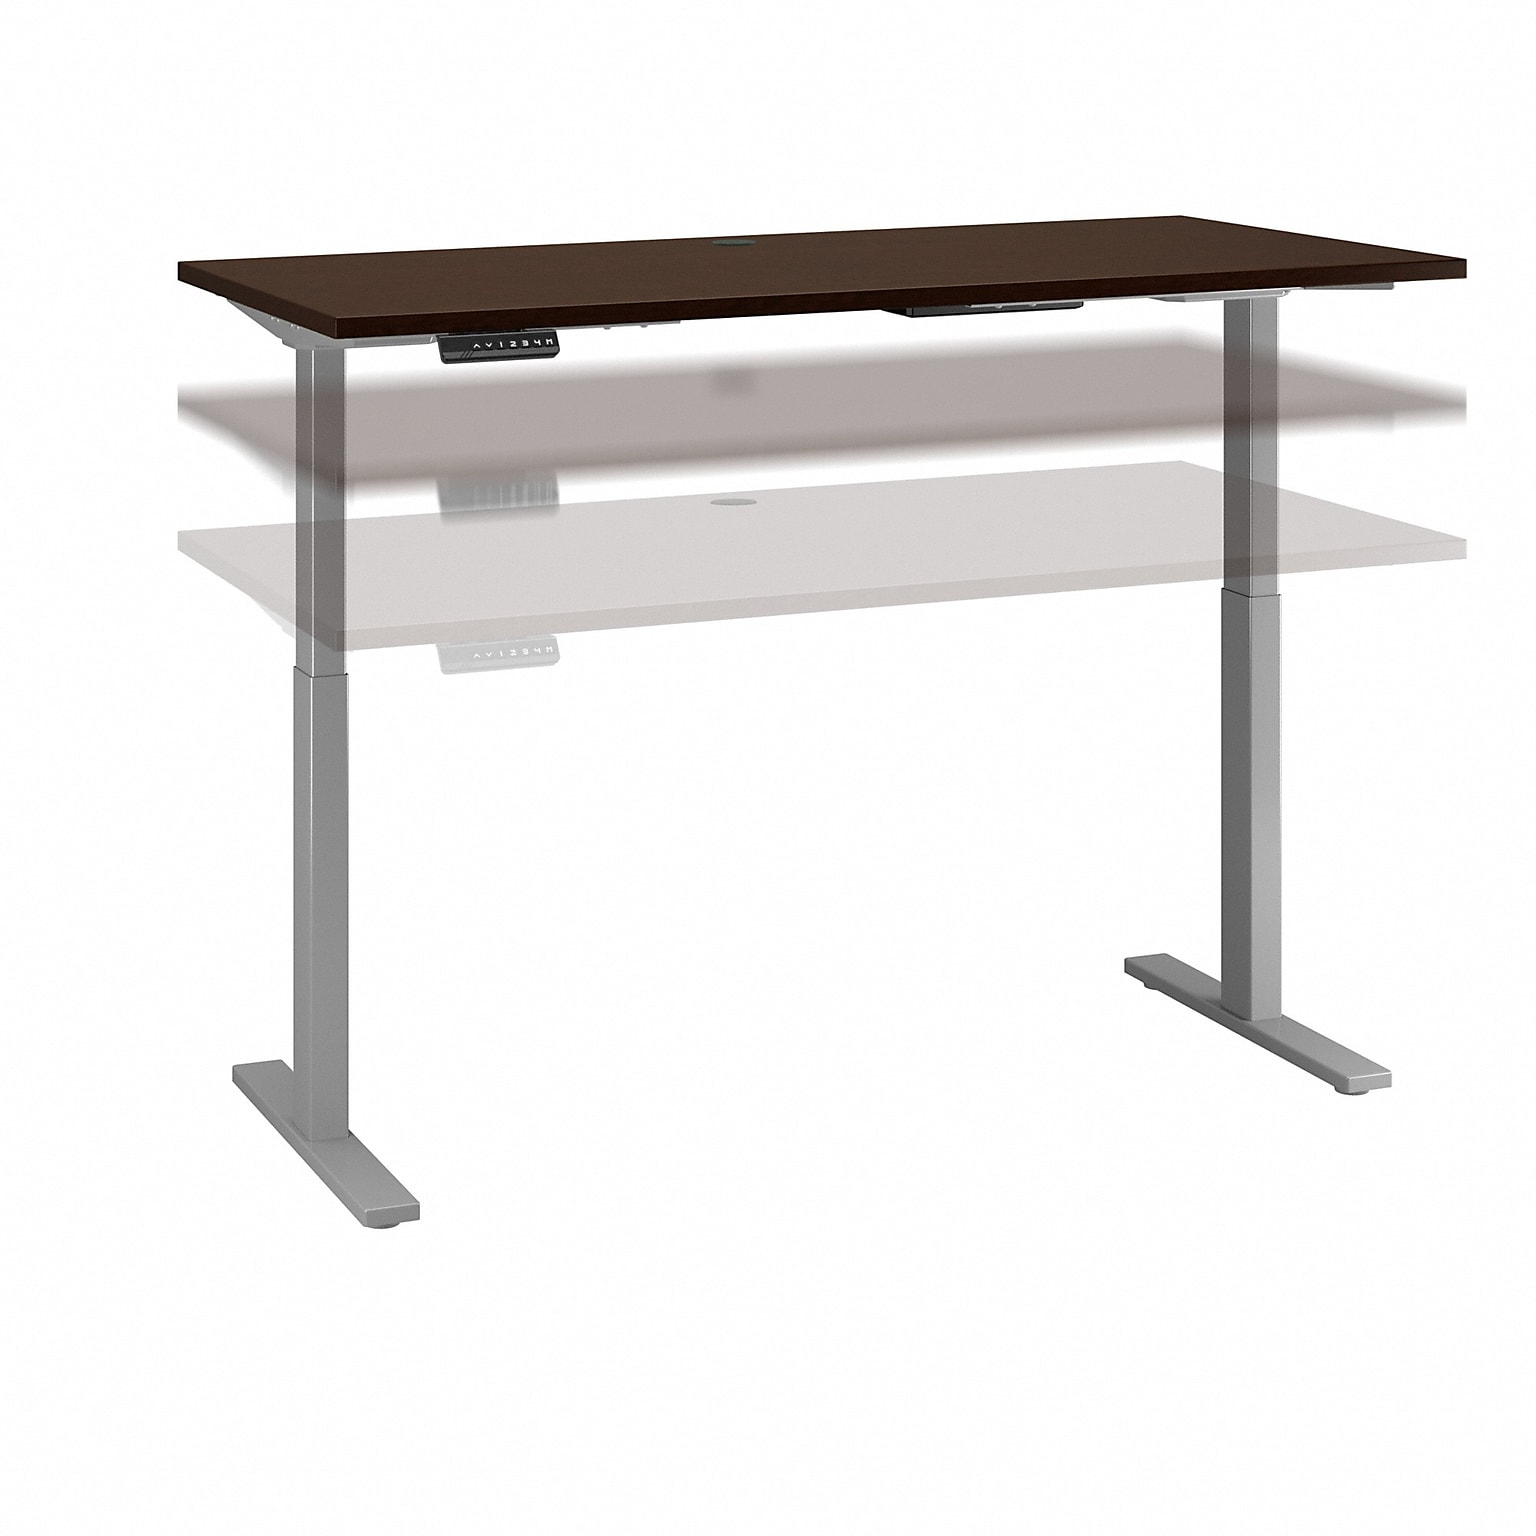 Bush Business Furniture Move 60 Series 60W Electric Height Adjustable Standing Desk, Mocha Cherry (M6S6030MRSK)